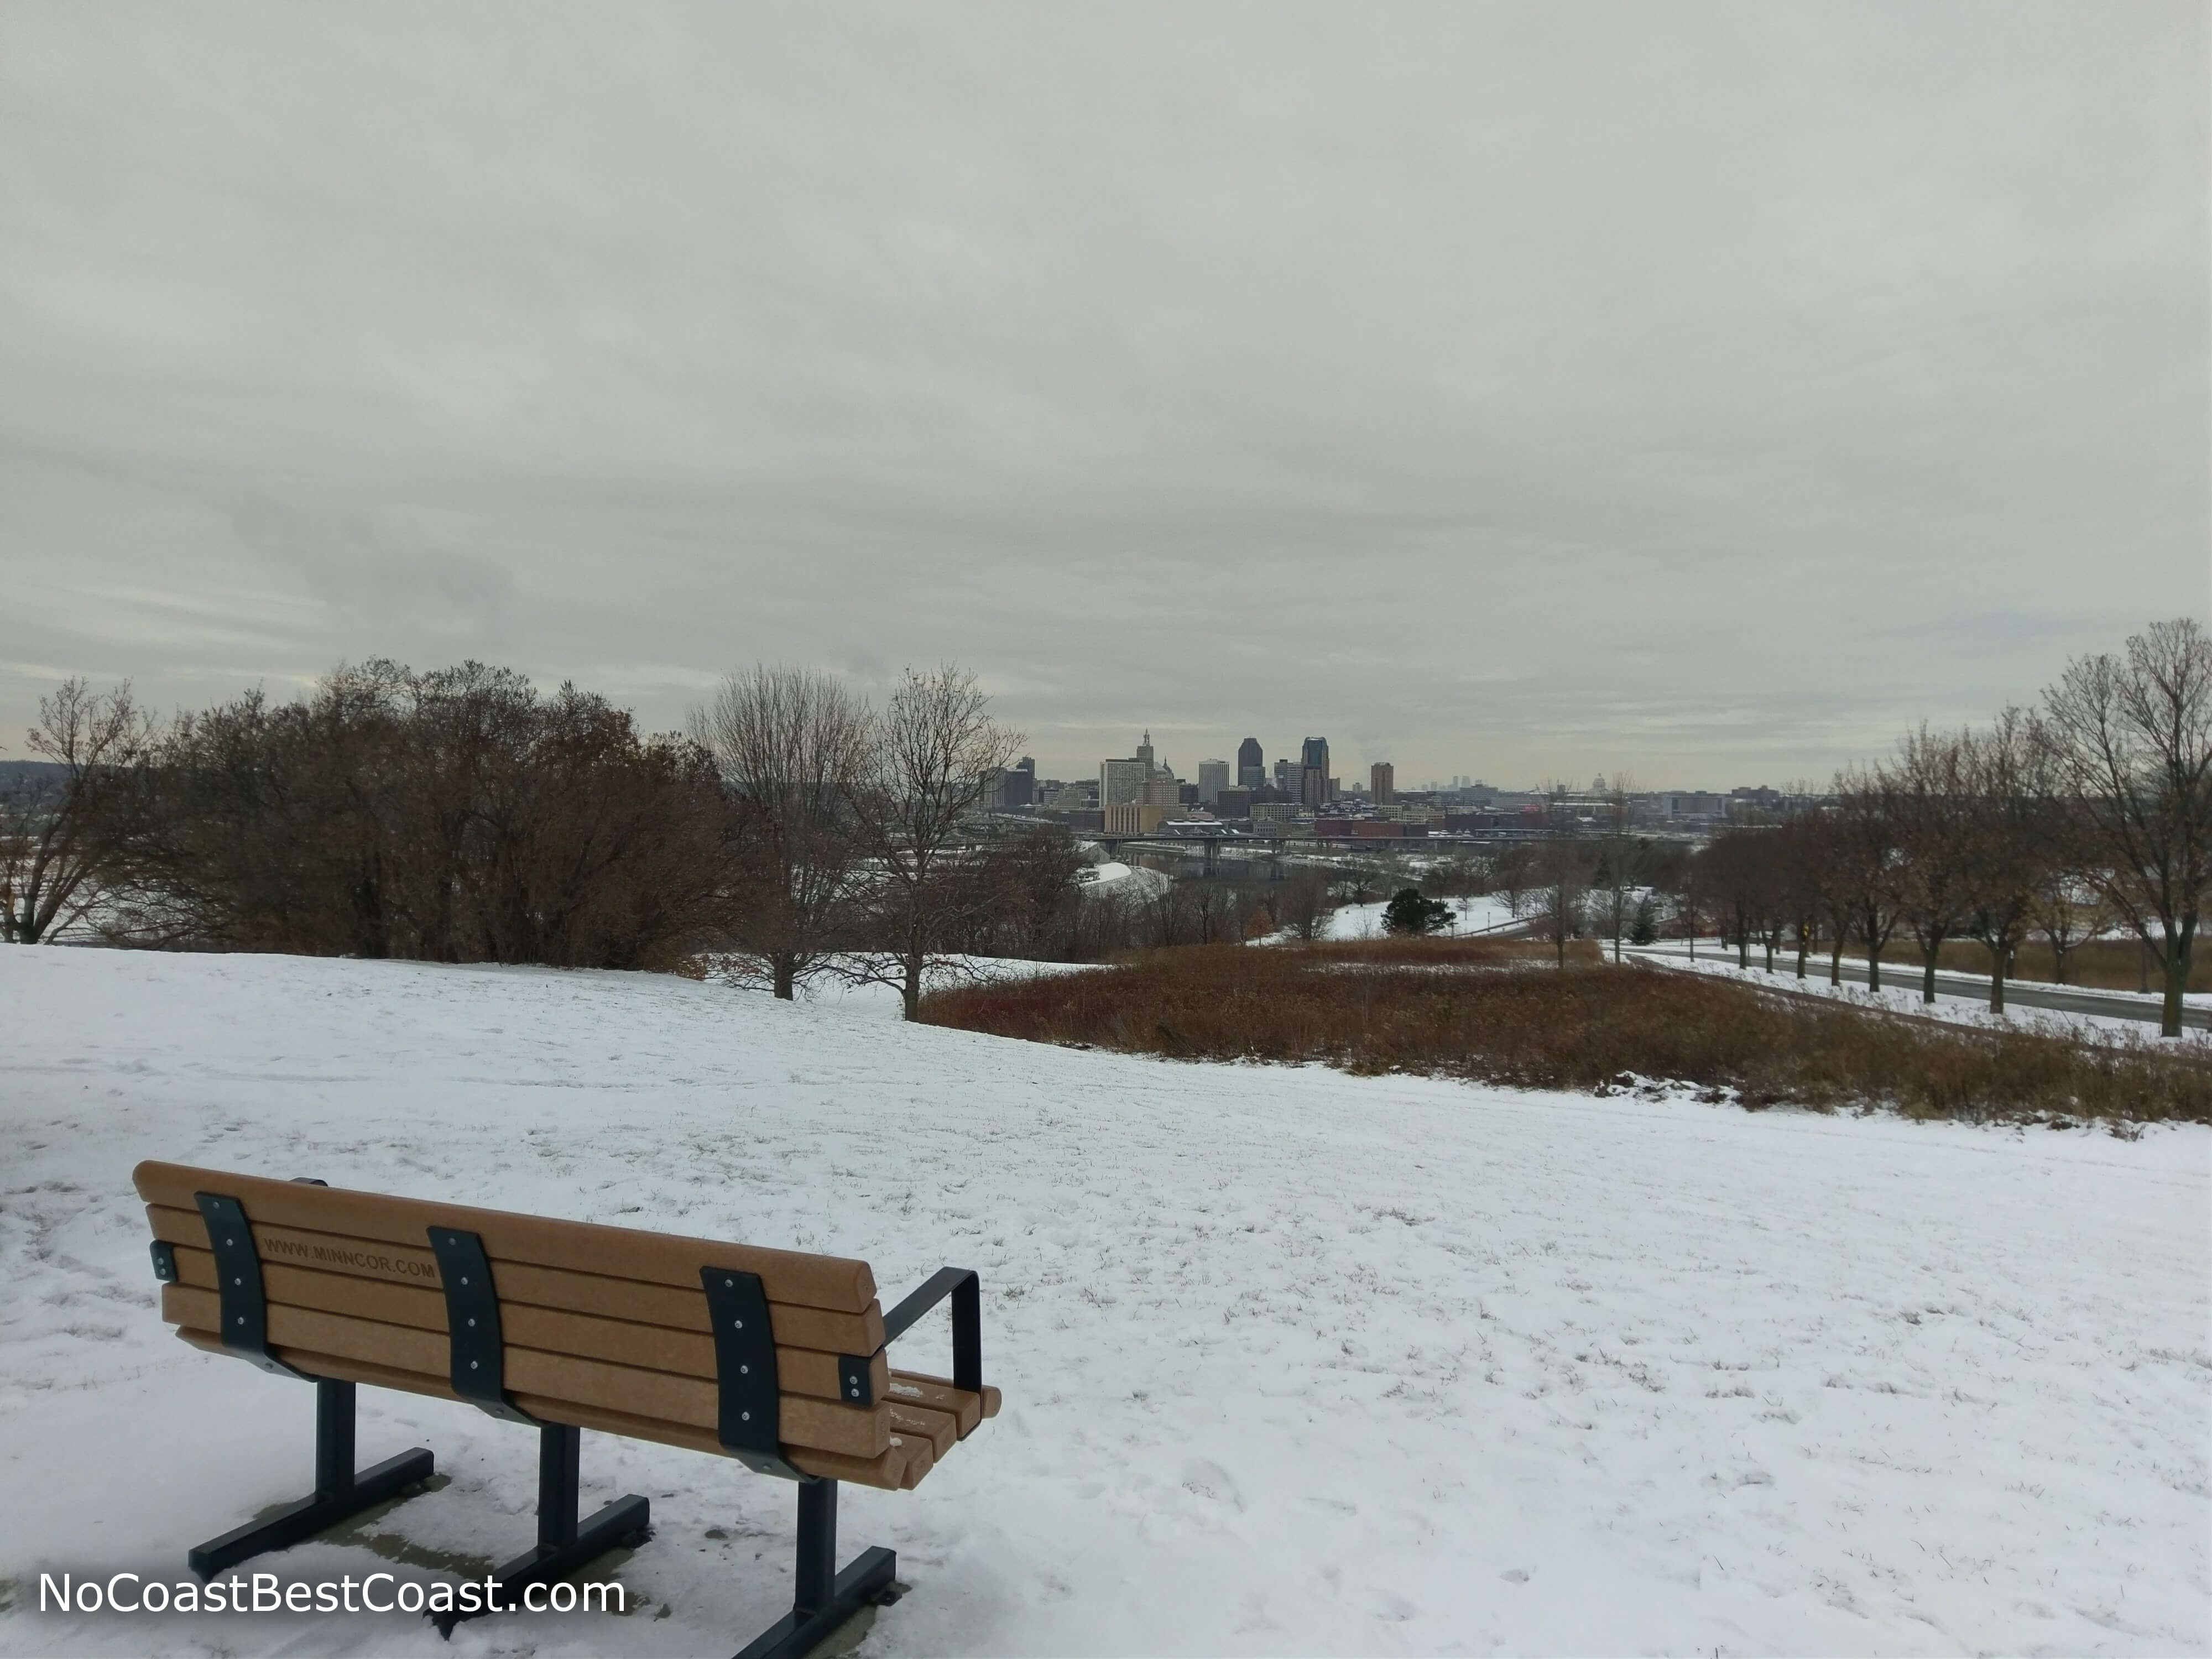 From this bench you can see the skylines of both Minneapolis and St. Paul